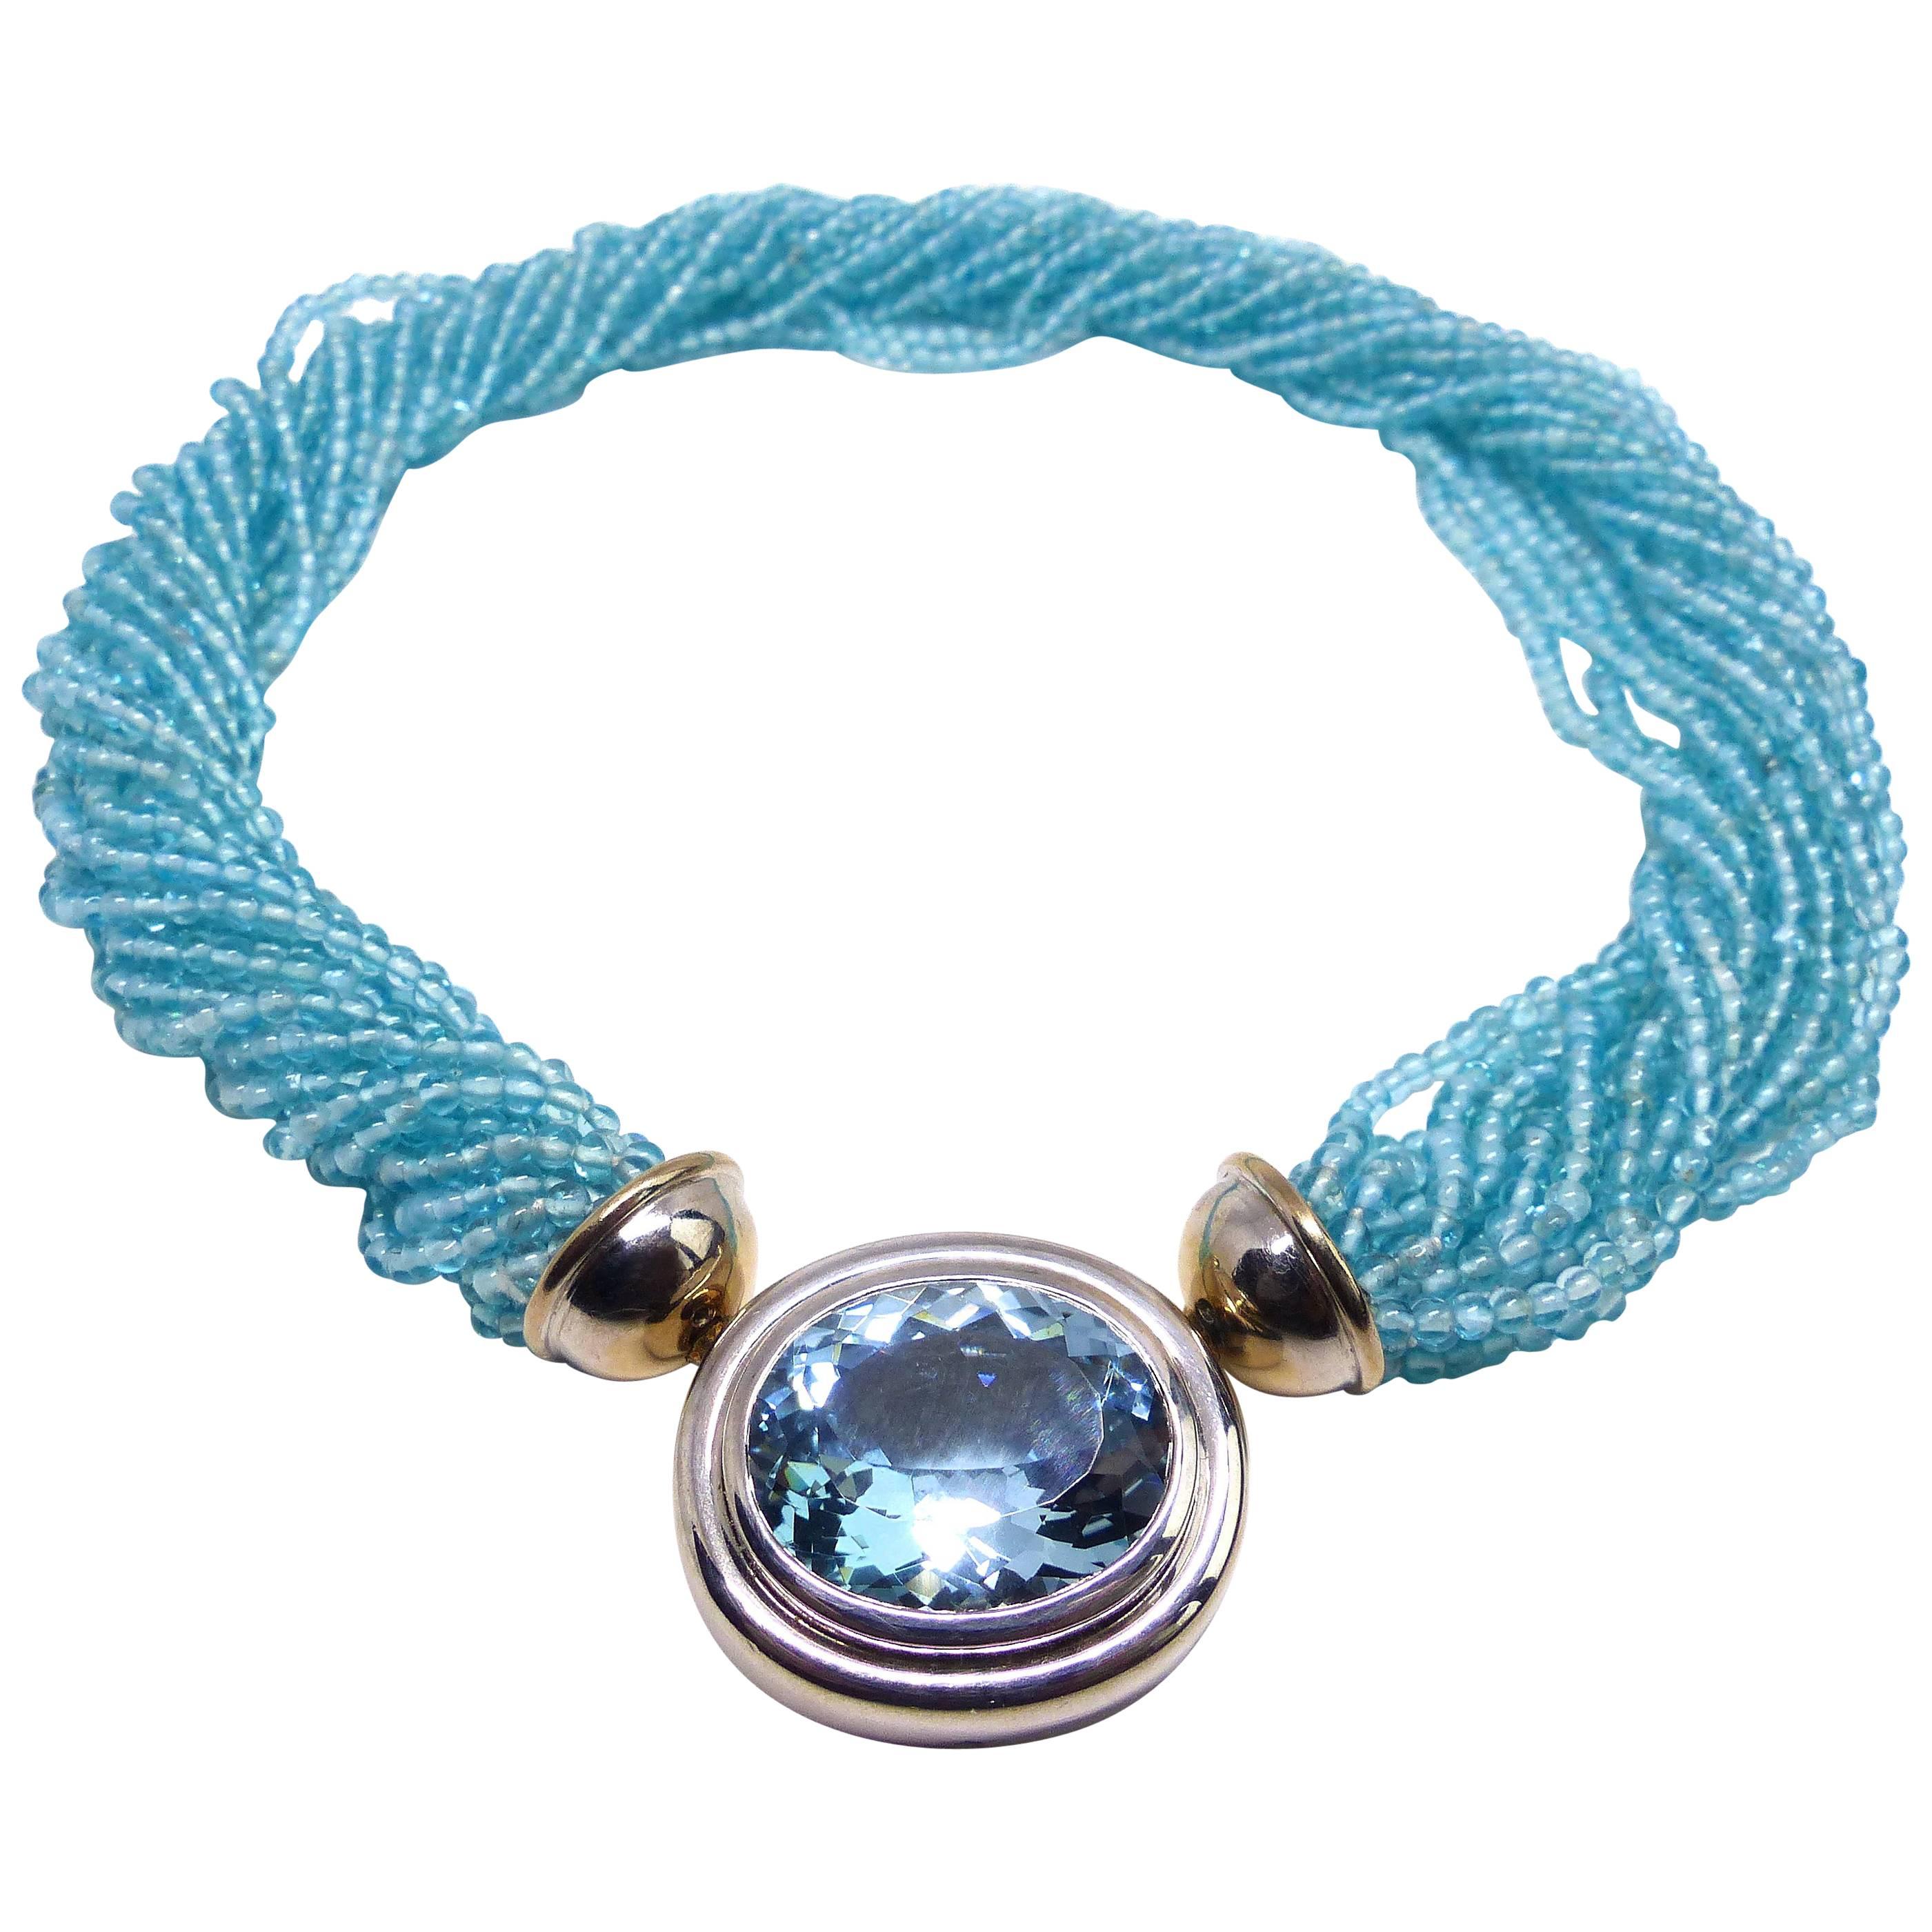 Necklace in White Gold with 1 Aquamarine and 1 Apatite Tassel. 